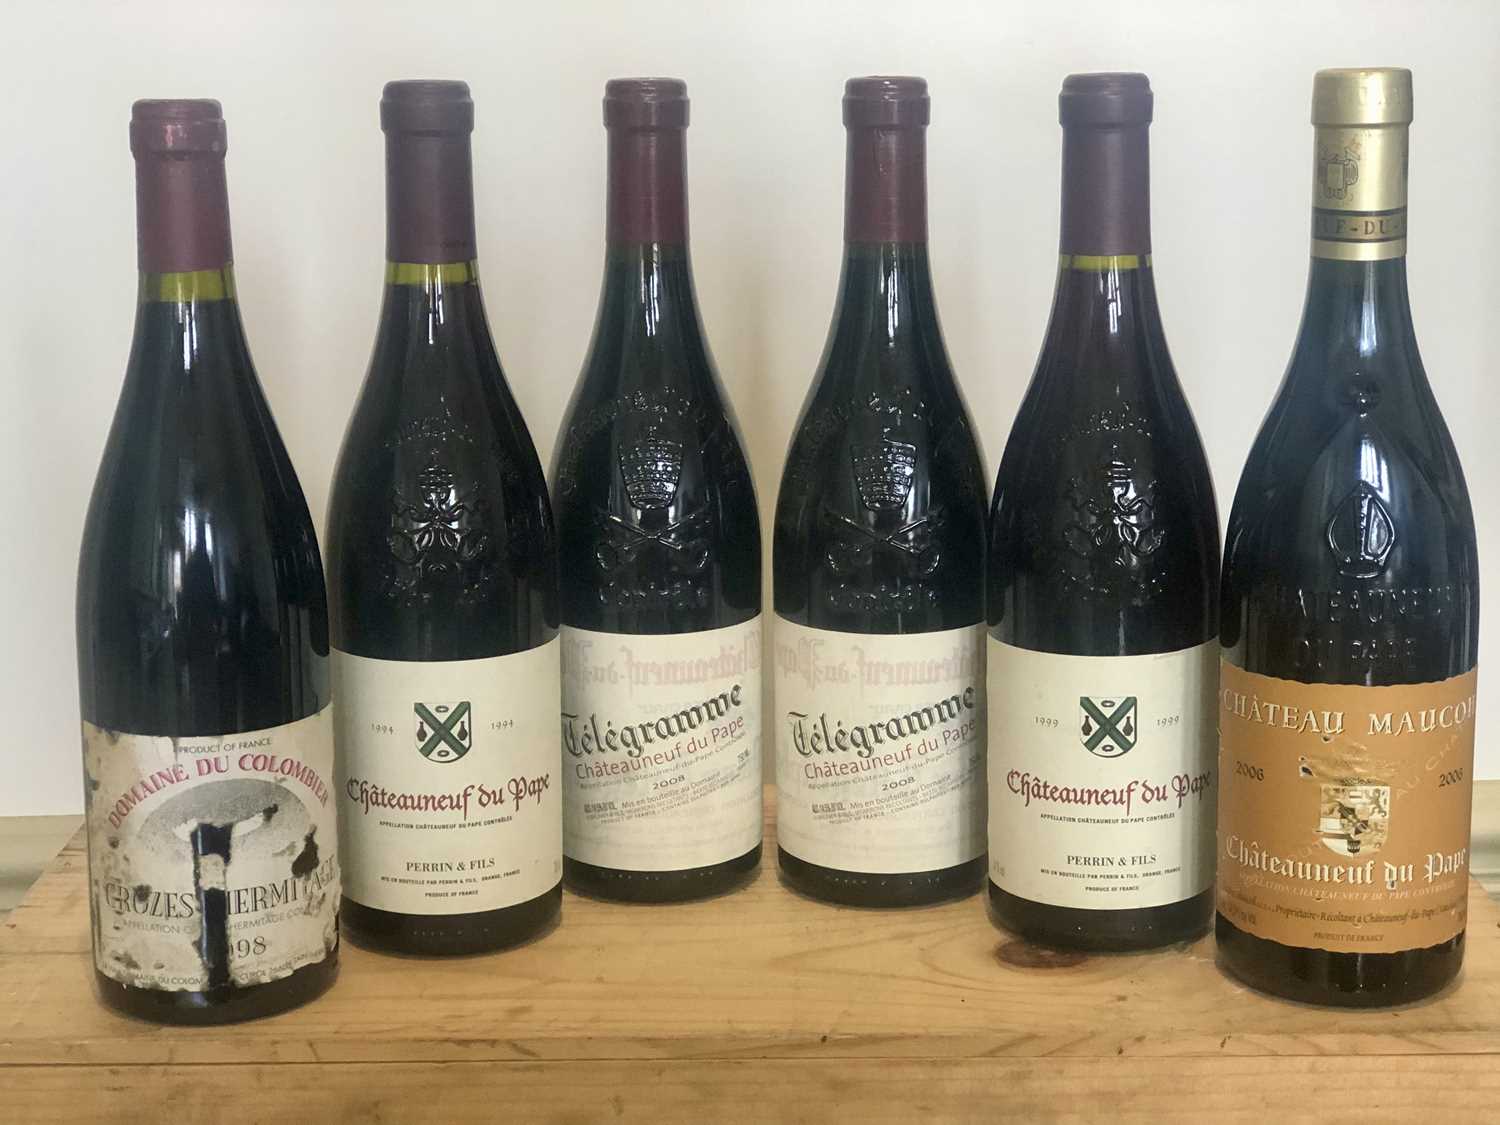 Lot 56 - 6 Bottles Mixed Lot Fine Chateauneuf du Pape and Crozes Hermitage